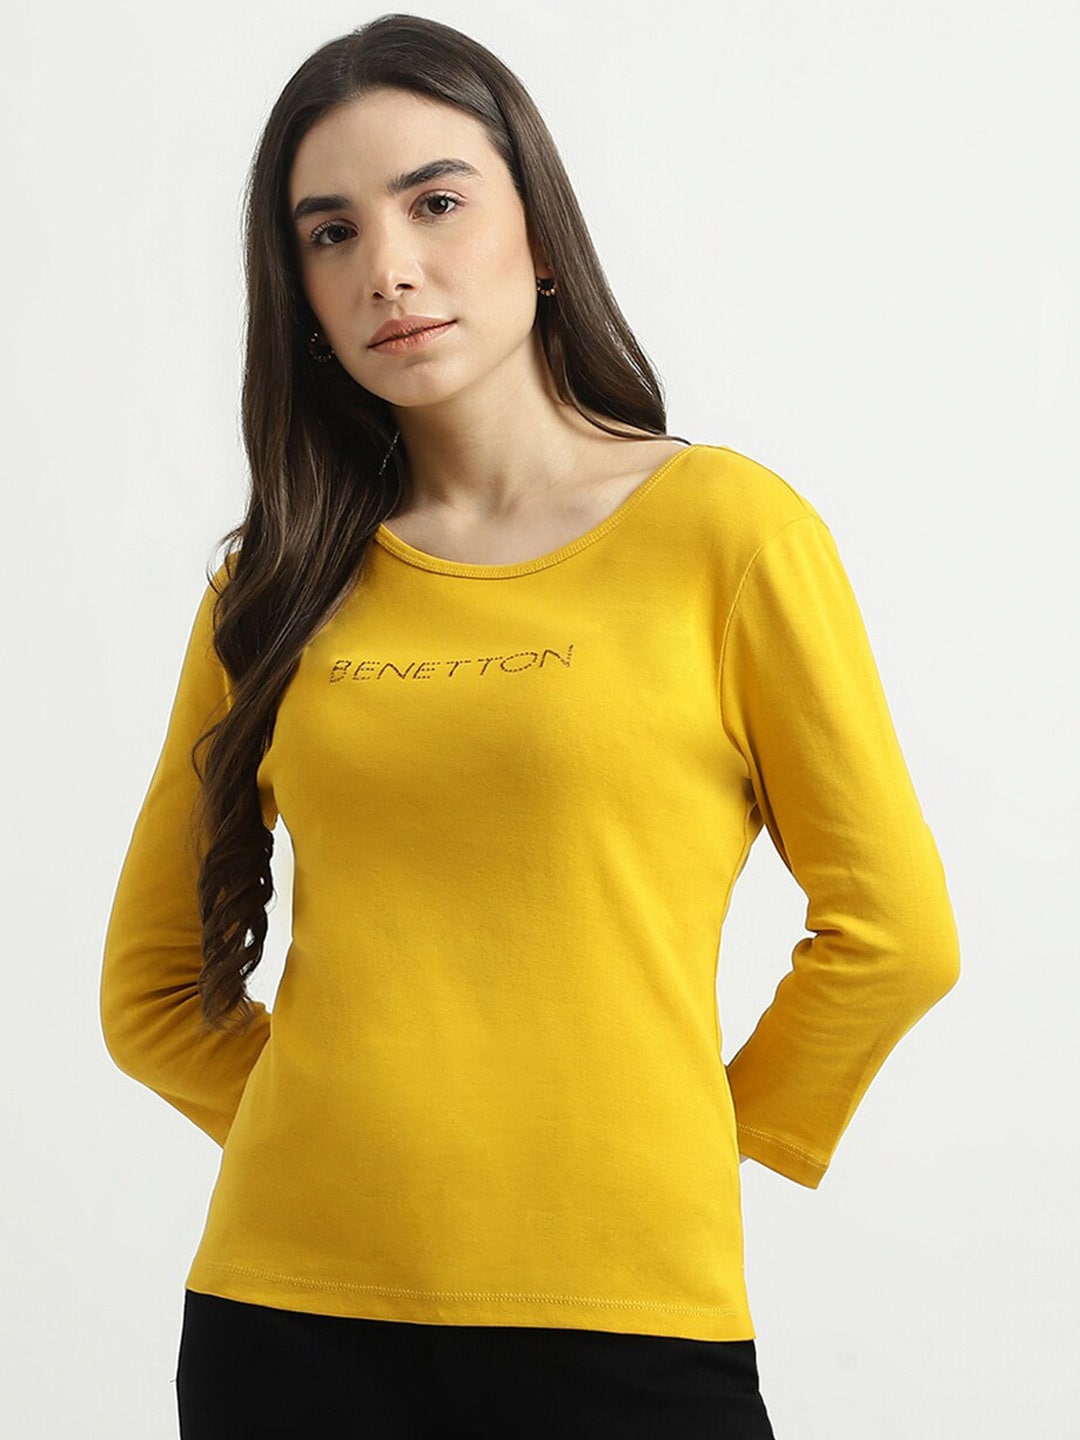 United Colors of Benetton Mustard Yellow Pure Cotton Top Price in India